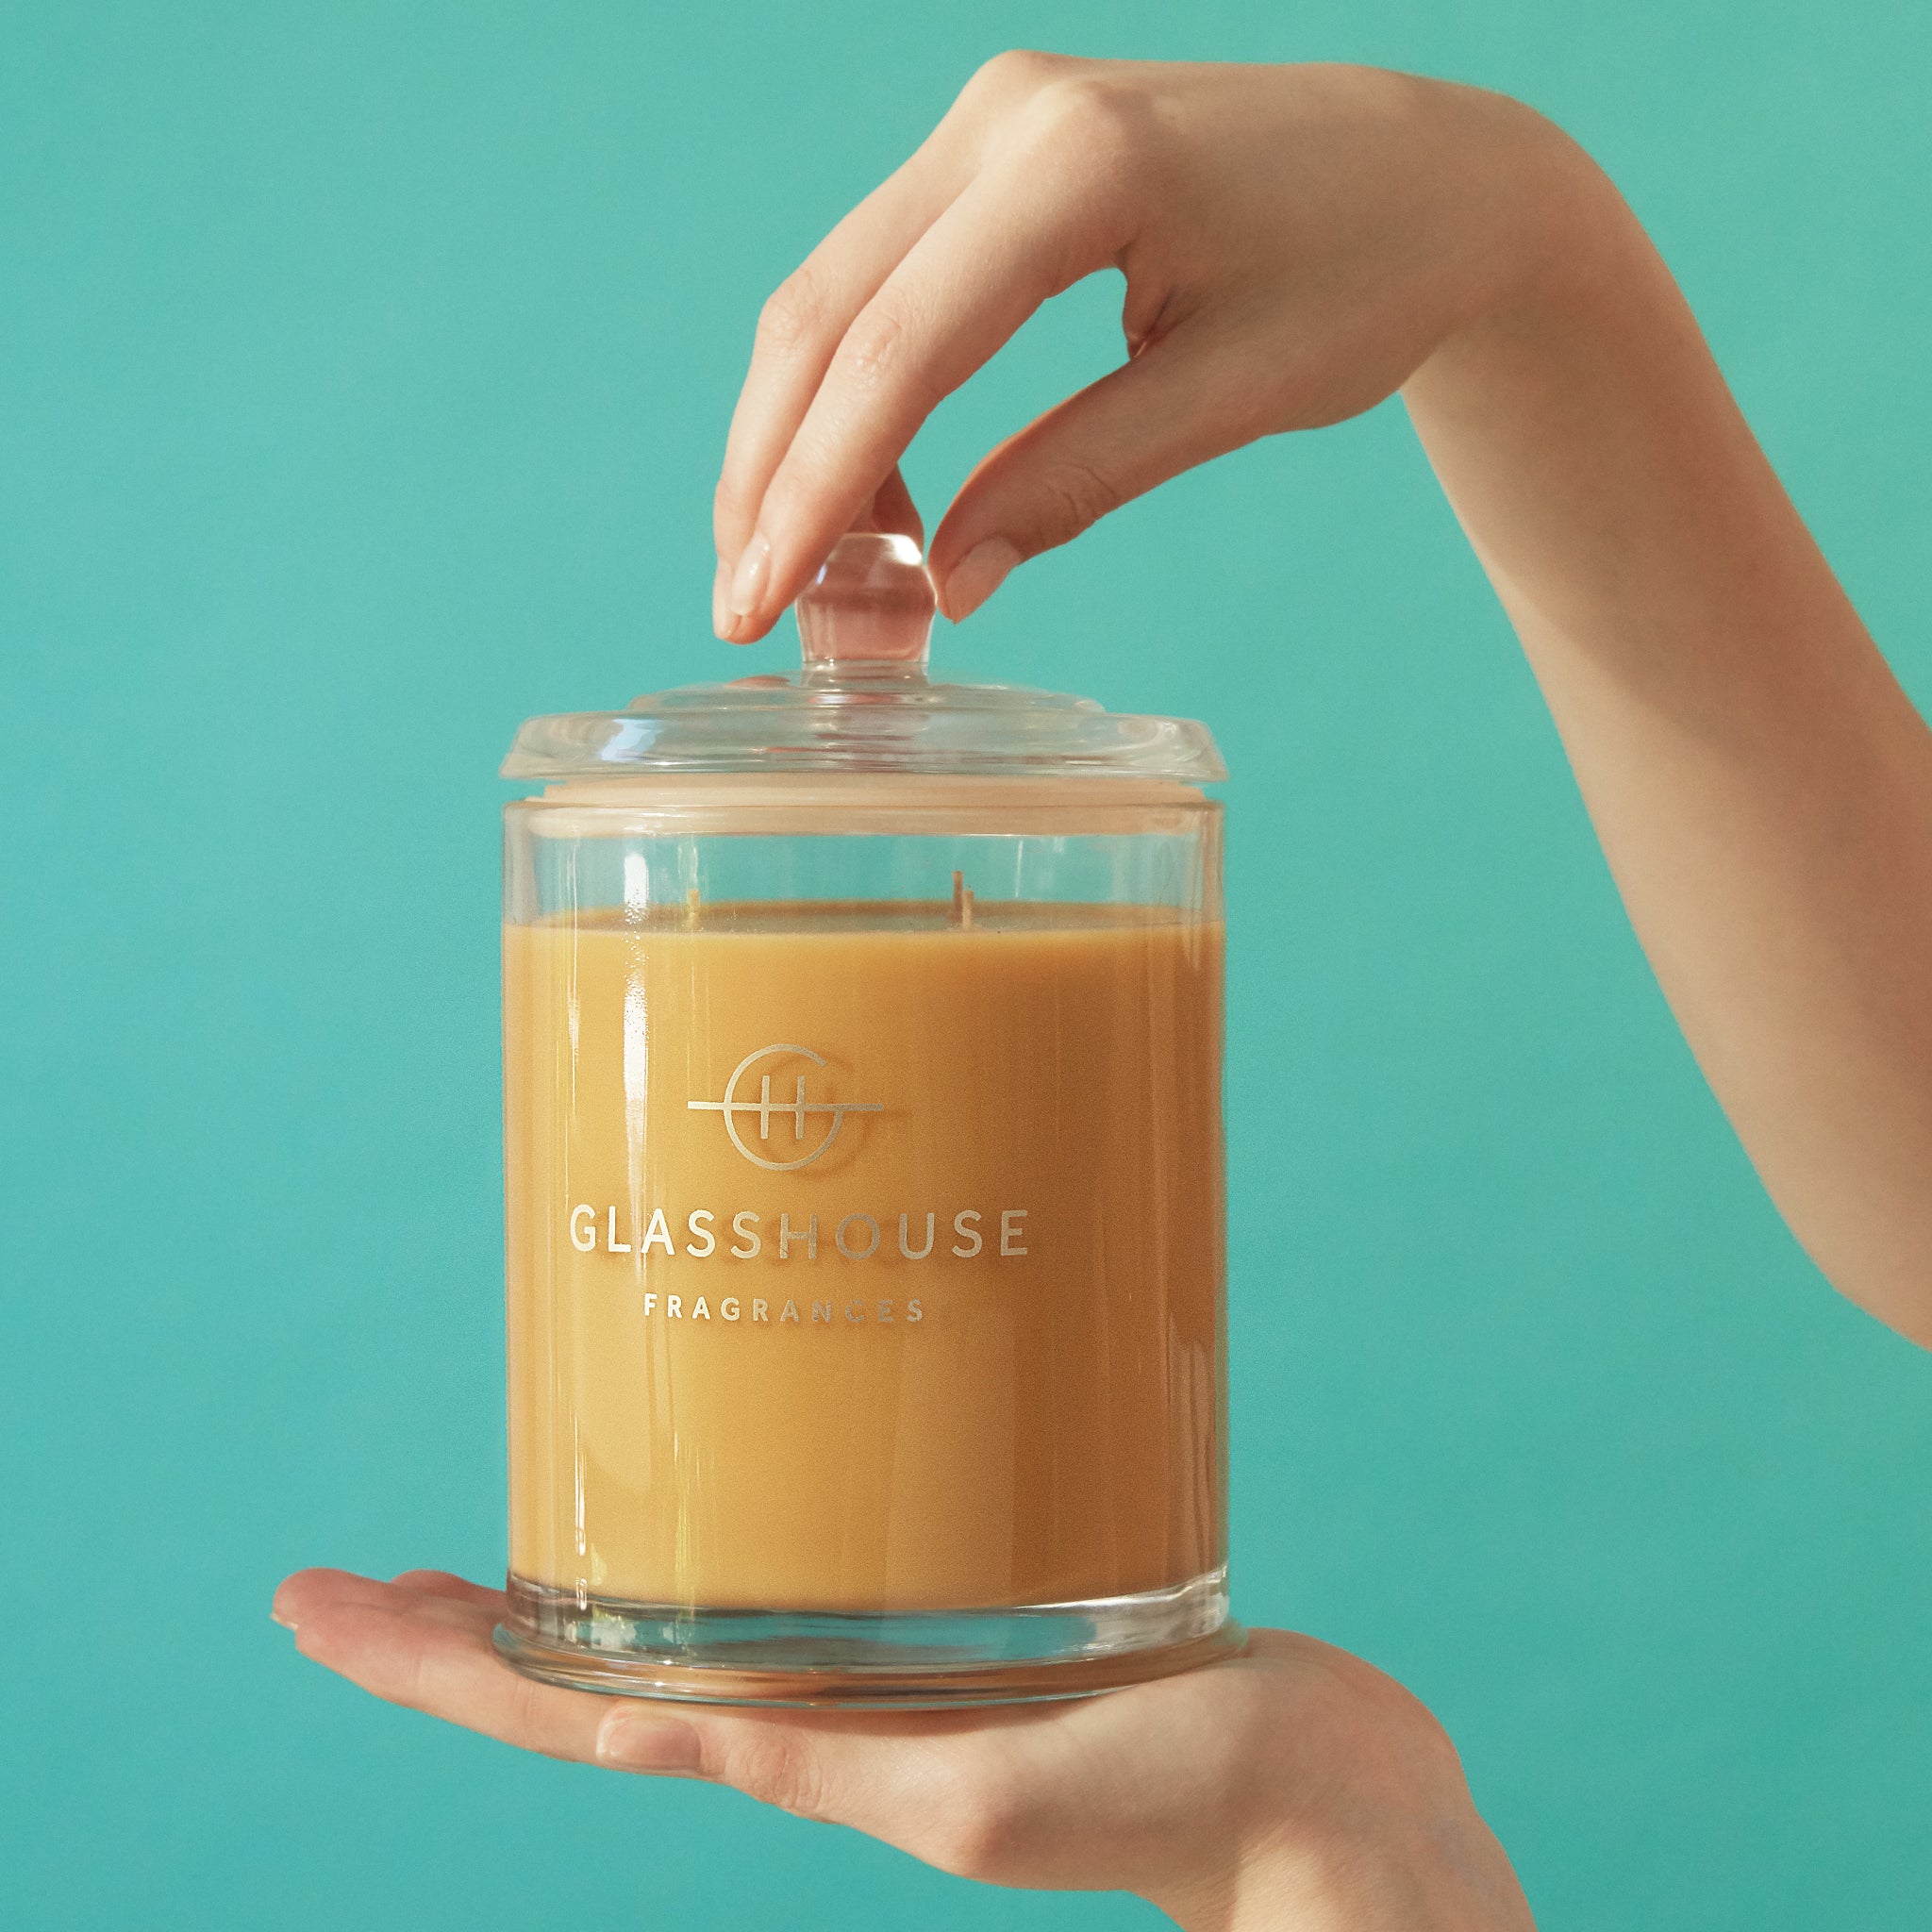 A Tahaa Affair 760g Vanilla Caramel Soy Candle held up by a pair of hands over a blue-green backdrop